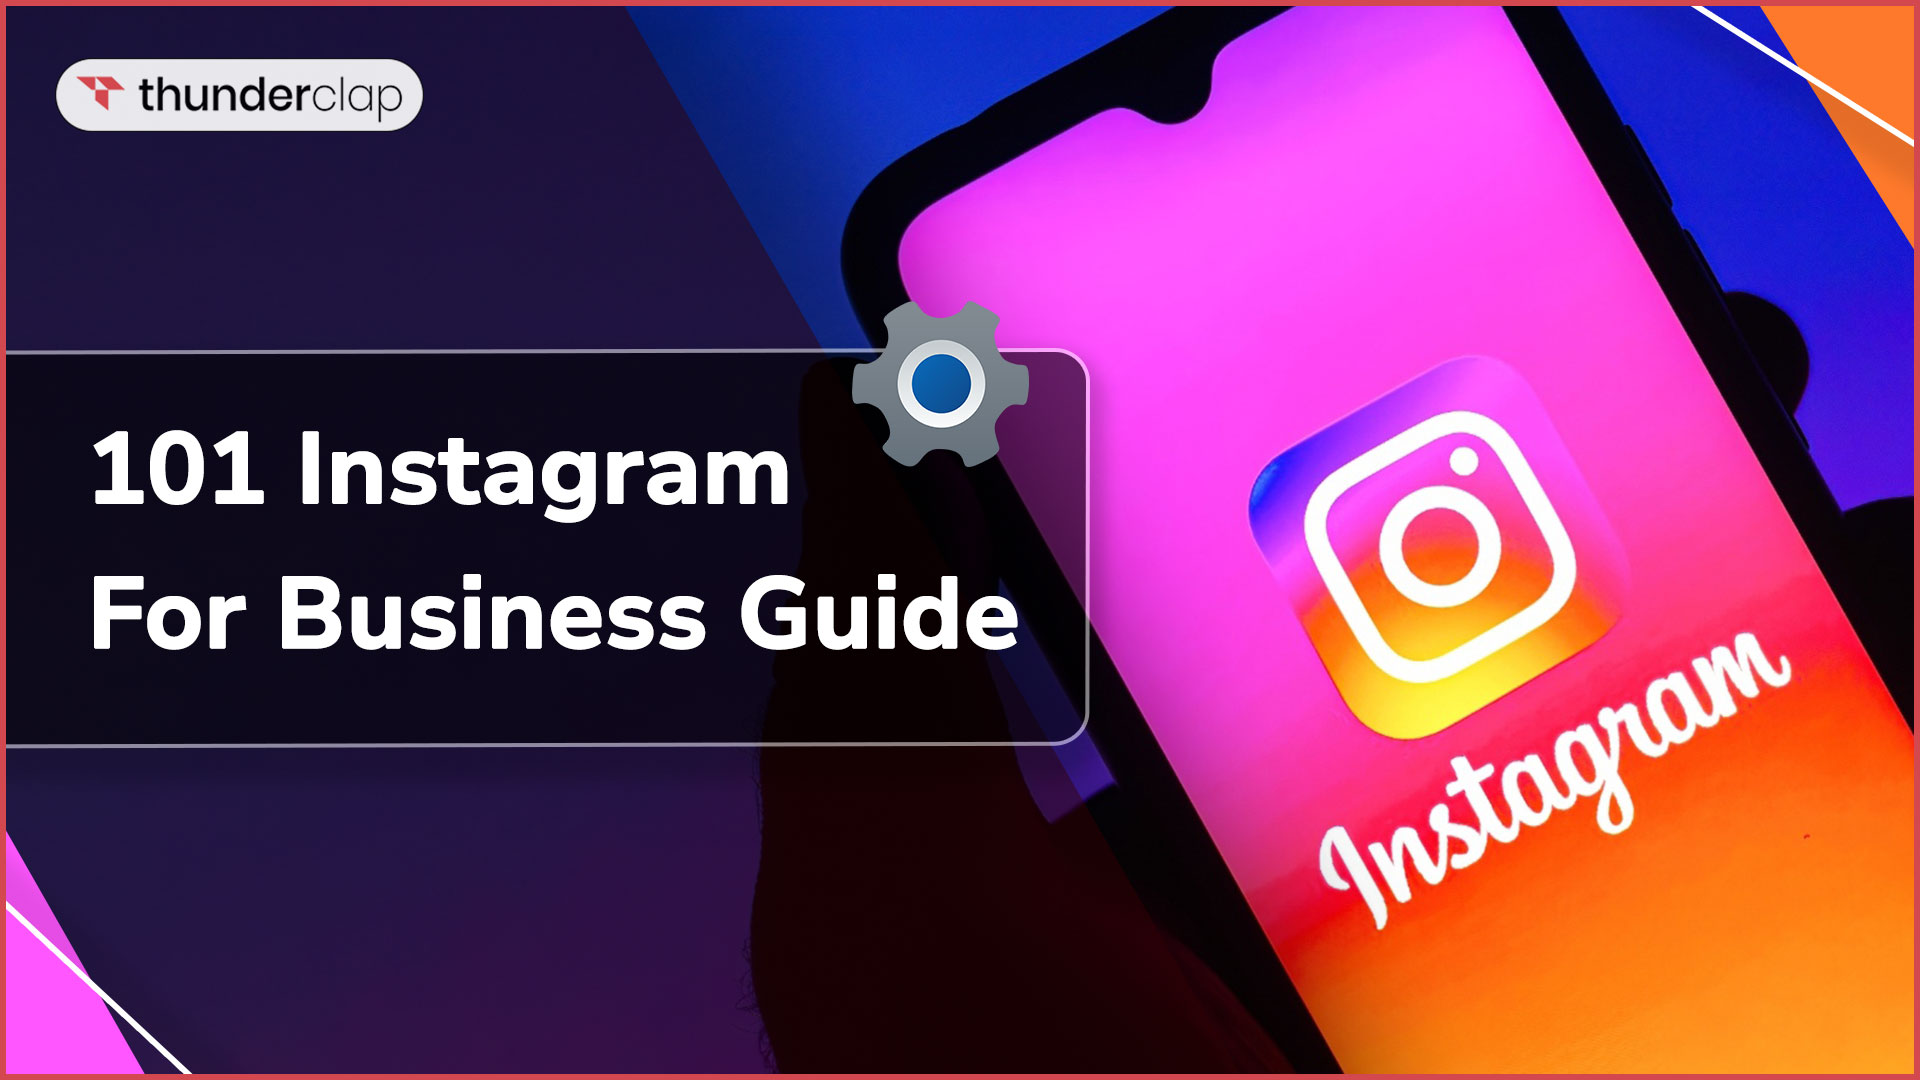 How To Grow Your Business On Instagram?